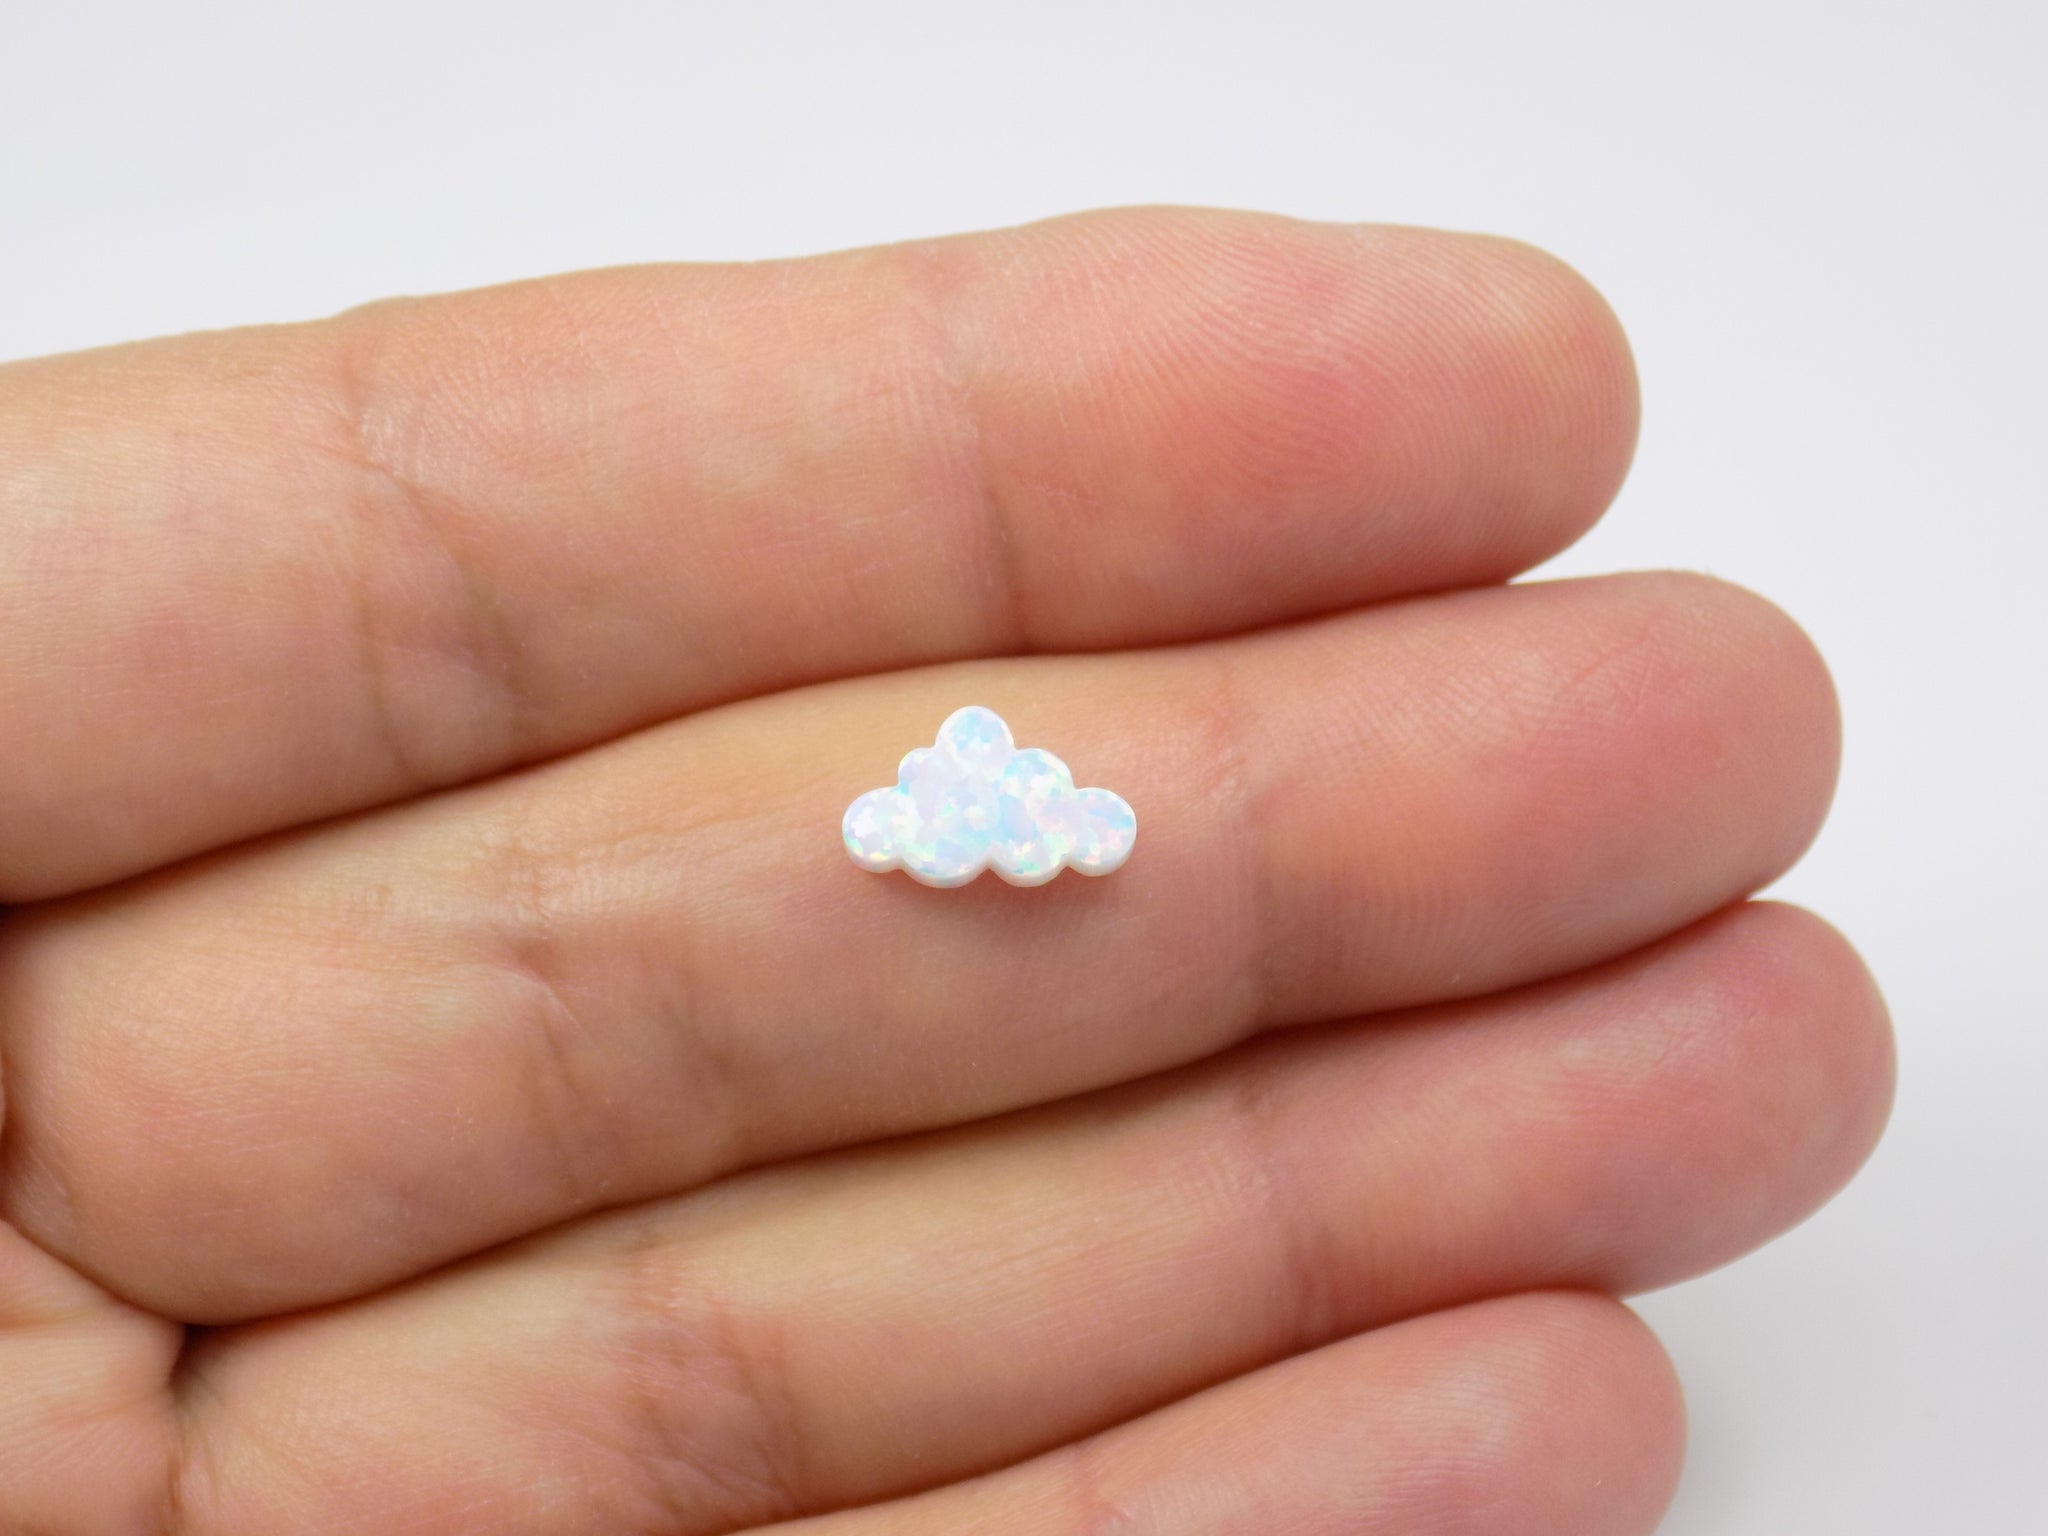 Opal Cloud Charm, White Cloud Pendant 7.3mmx12mm Thickness 2.7mm, hole size 1.30mm. Authentic Lab-created Opal